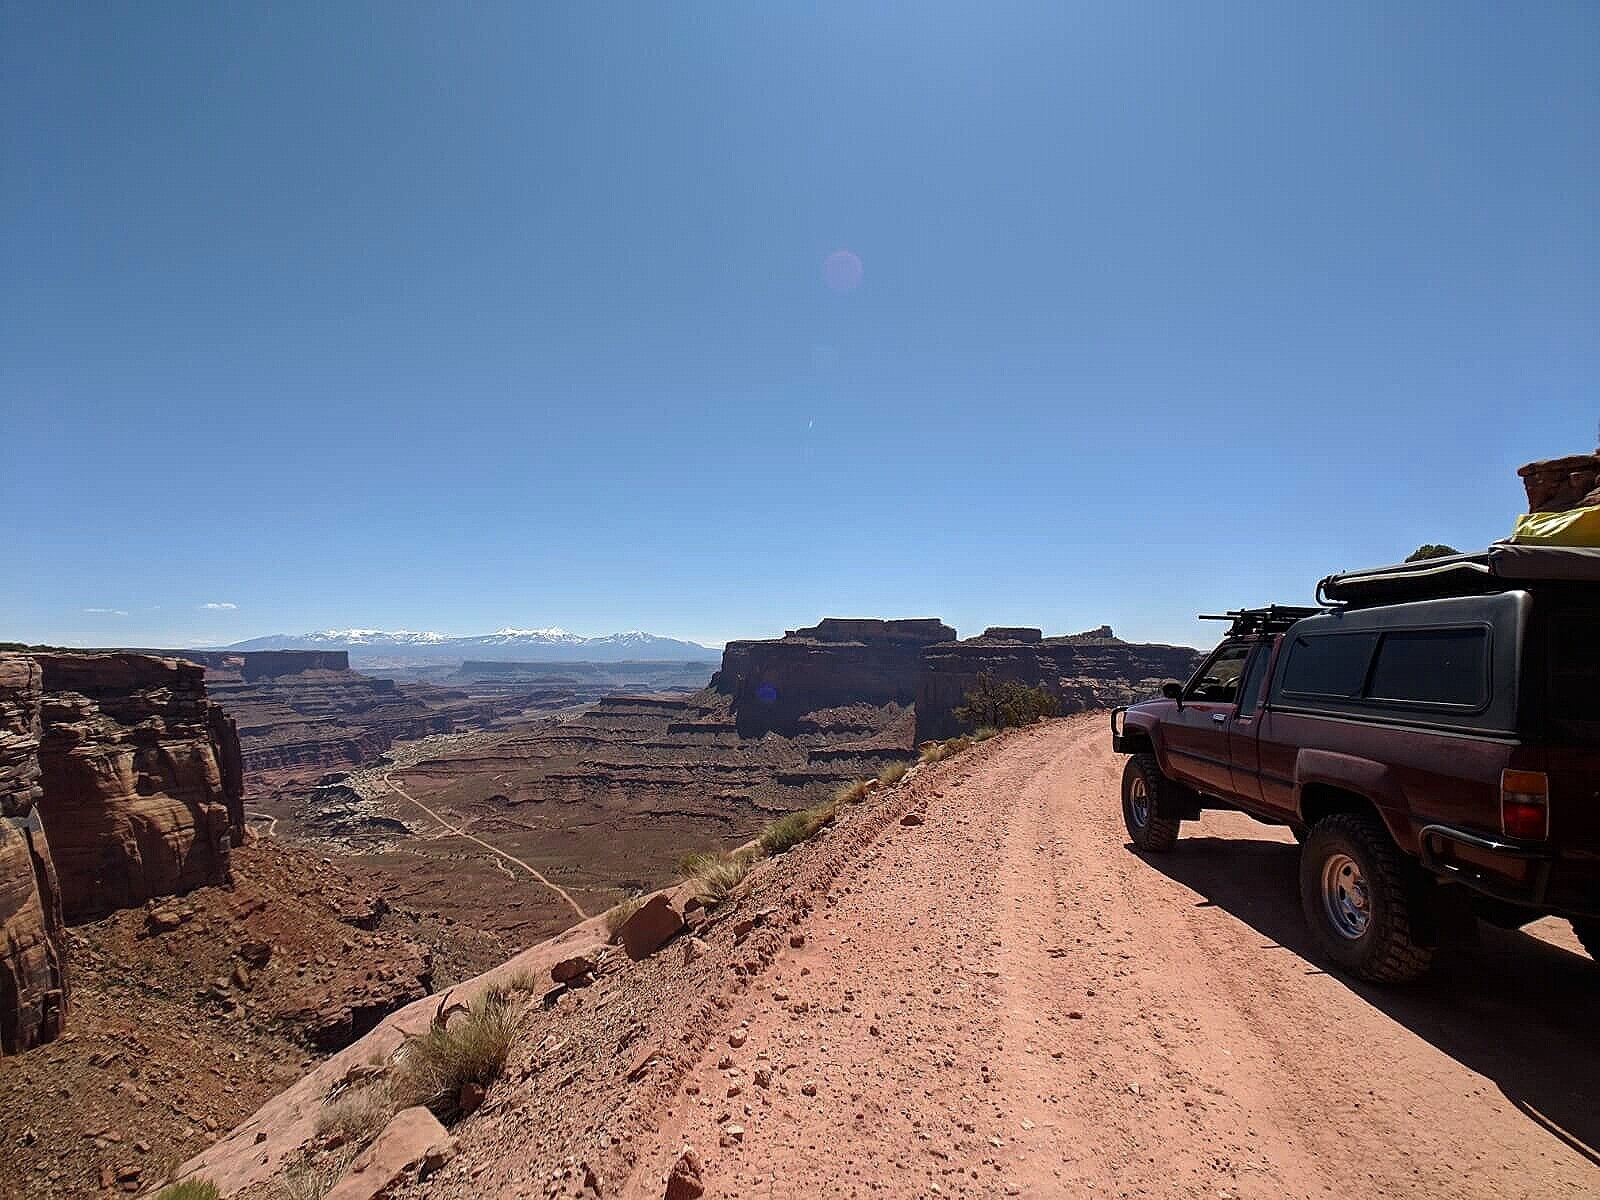 Views from the mesa top while driving the White Rim Road in Canyonlands National Park in Moab, Utah